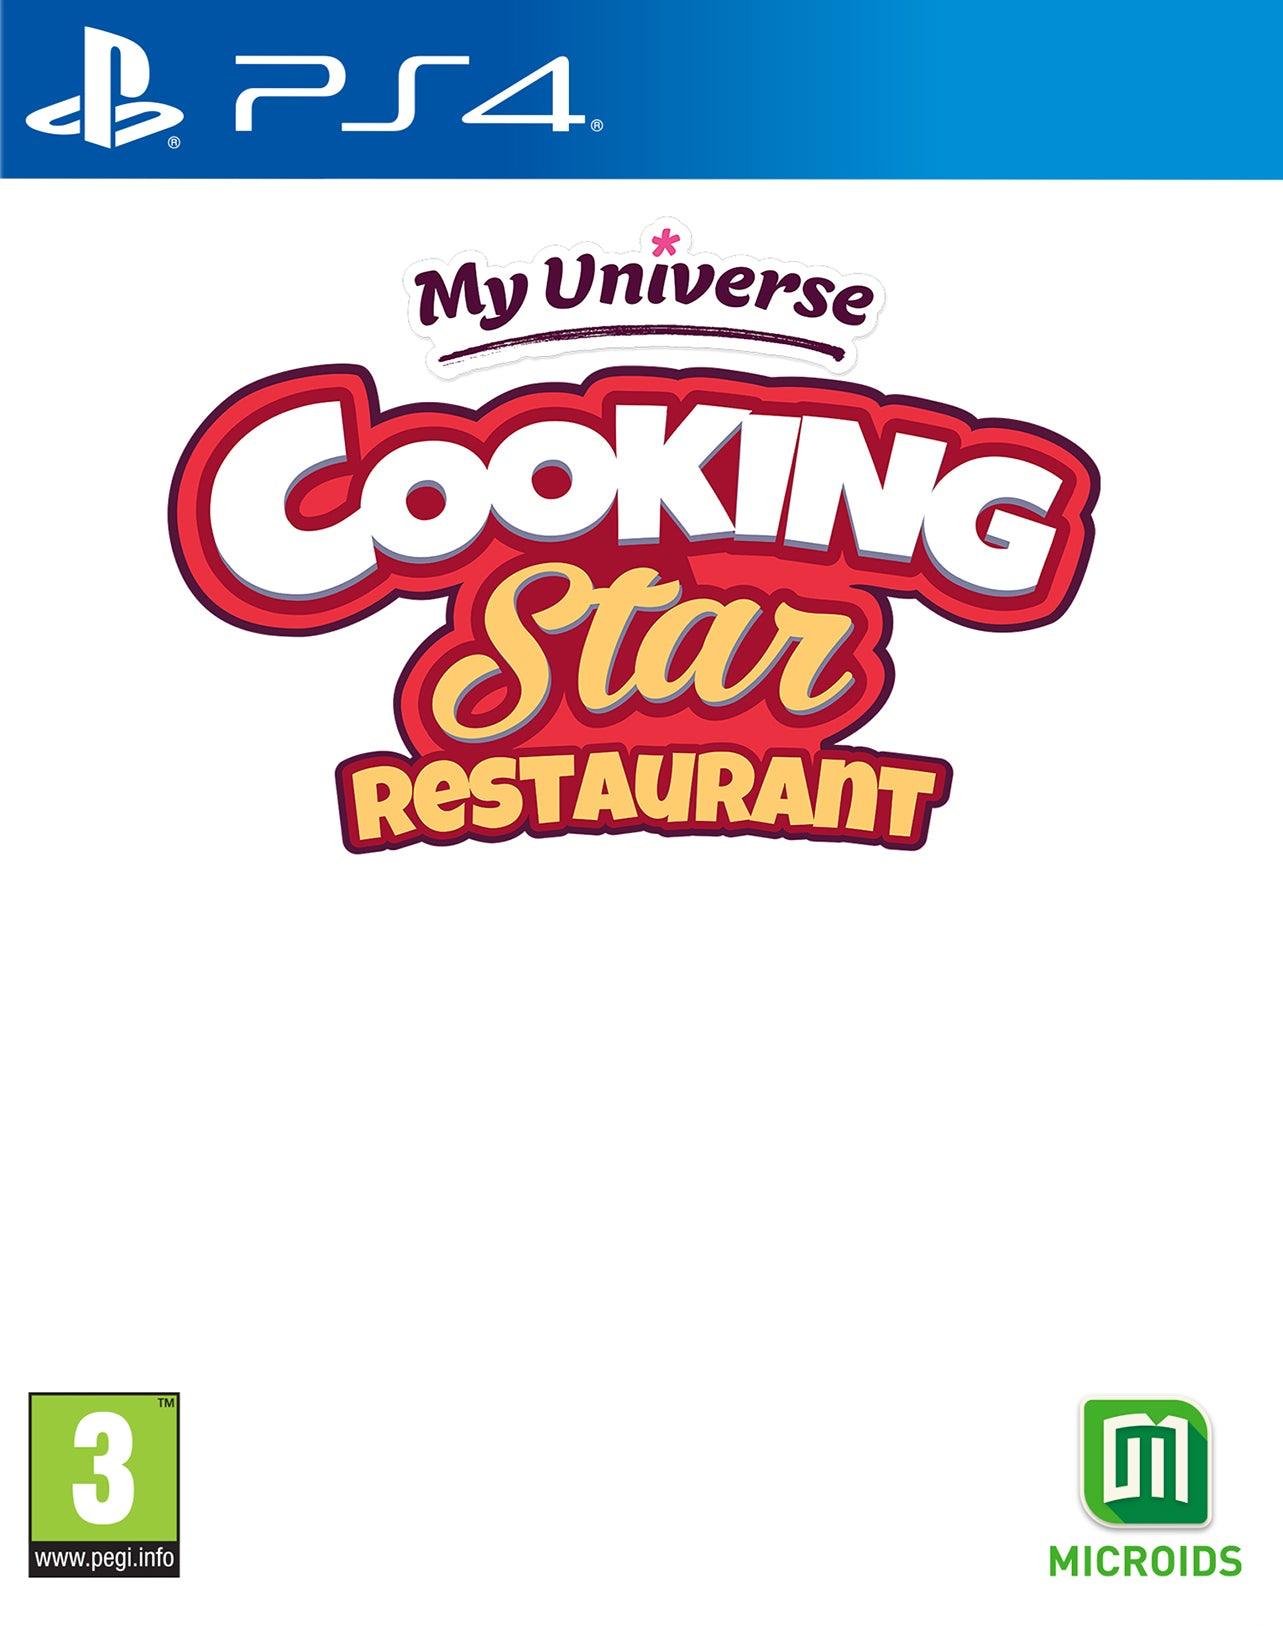 My Uni Cooking Star Restaurant - Want a New Gadget